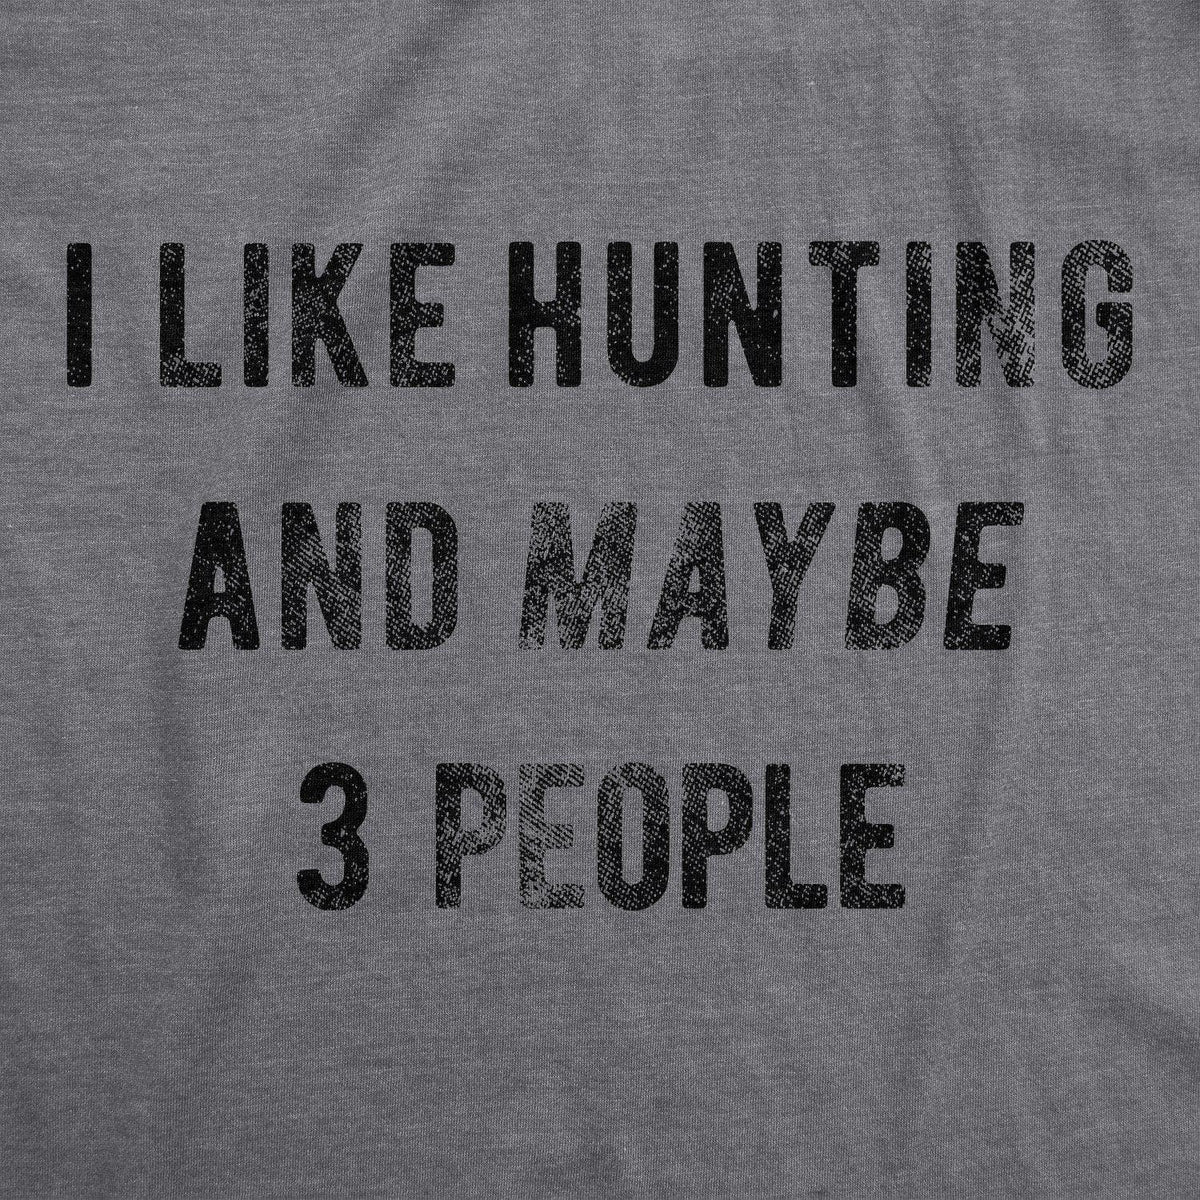 I Like Hunting And Maybe 3 People Men&#39;s Tshirt  -  Crazy Dog T-Shirts